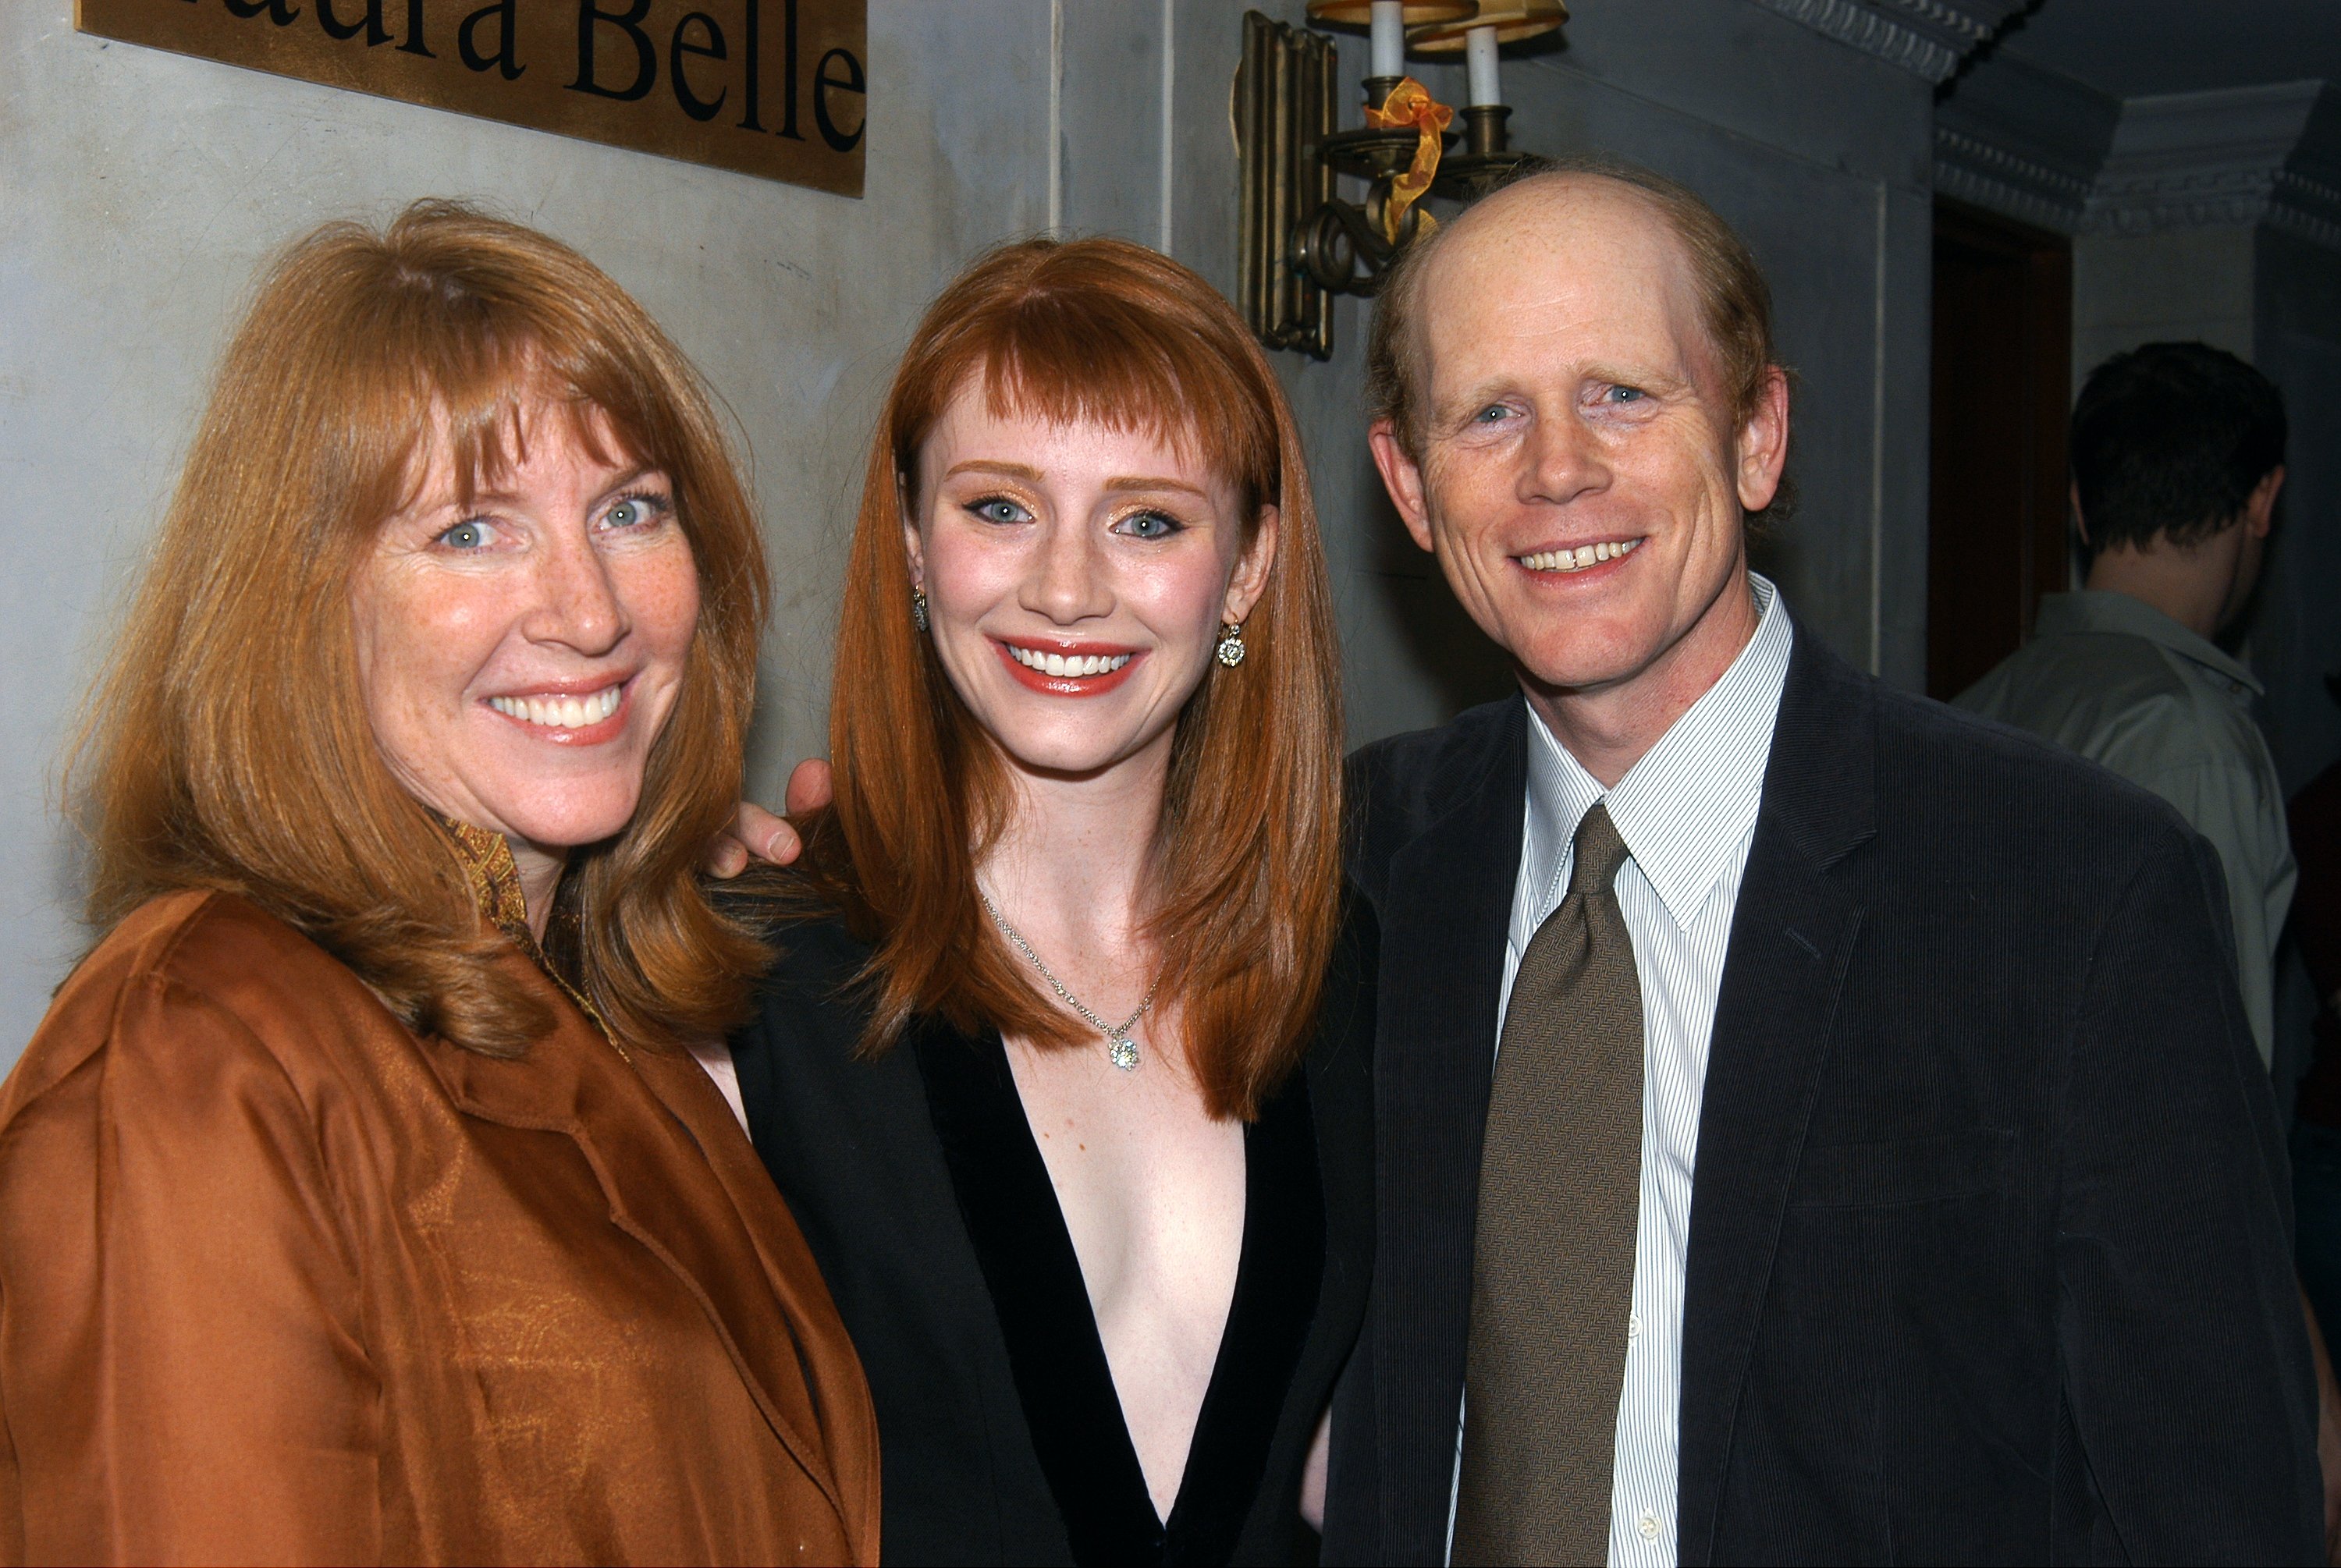 Cheryl, Bryce, and Ron Howard at the Roundabout Theatre Company's opening night party for "Tartuffe" as Bryce made her Broadway debut on January 9, 2003 | Source: Getty Images